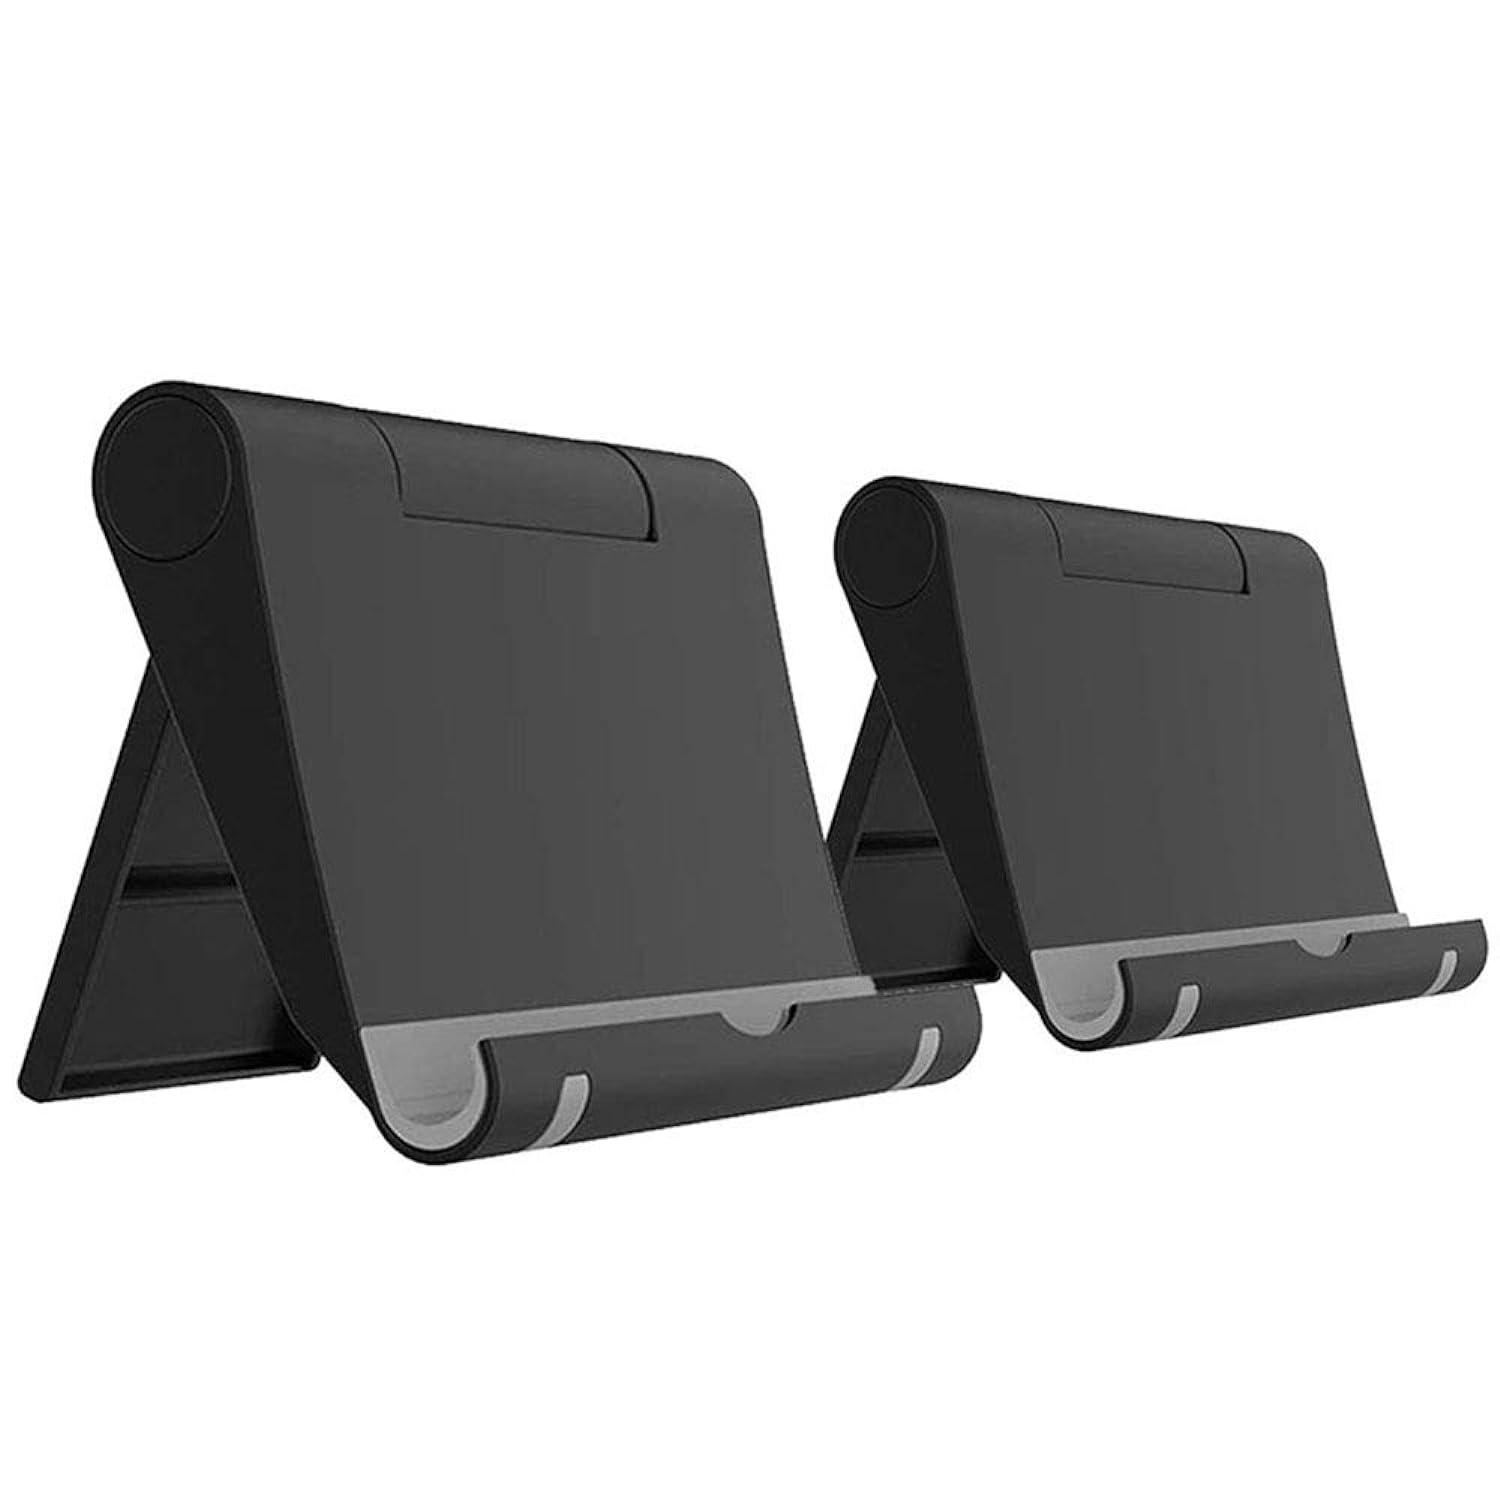 Basom cell phone stand for desk foldable, 2 pack desk phone holder stand for office kitchen travel, mobile phone stand for iphone s